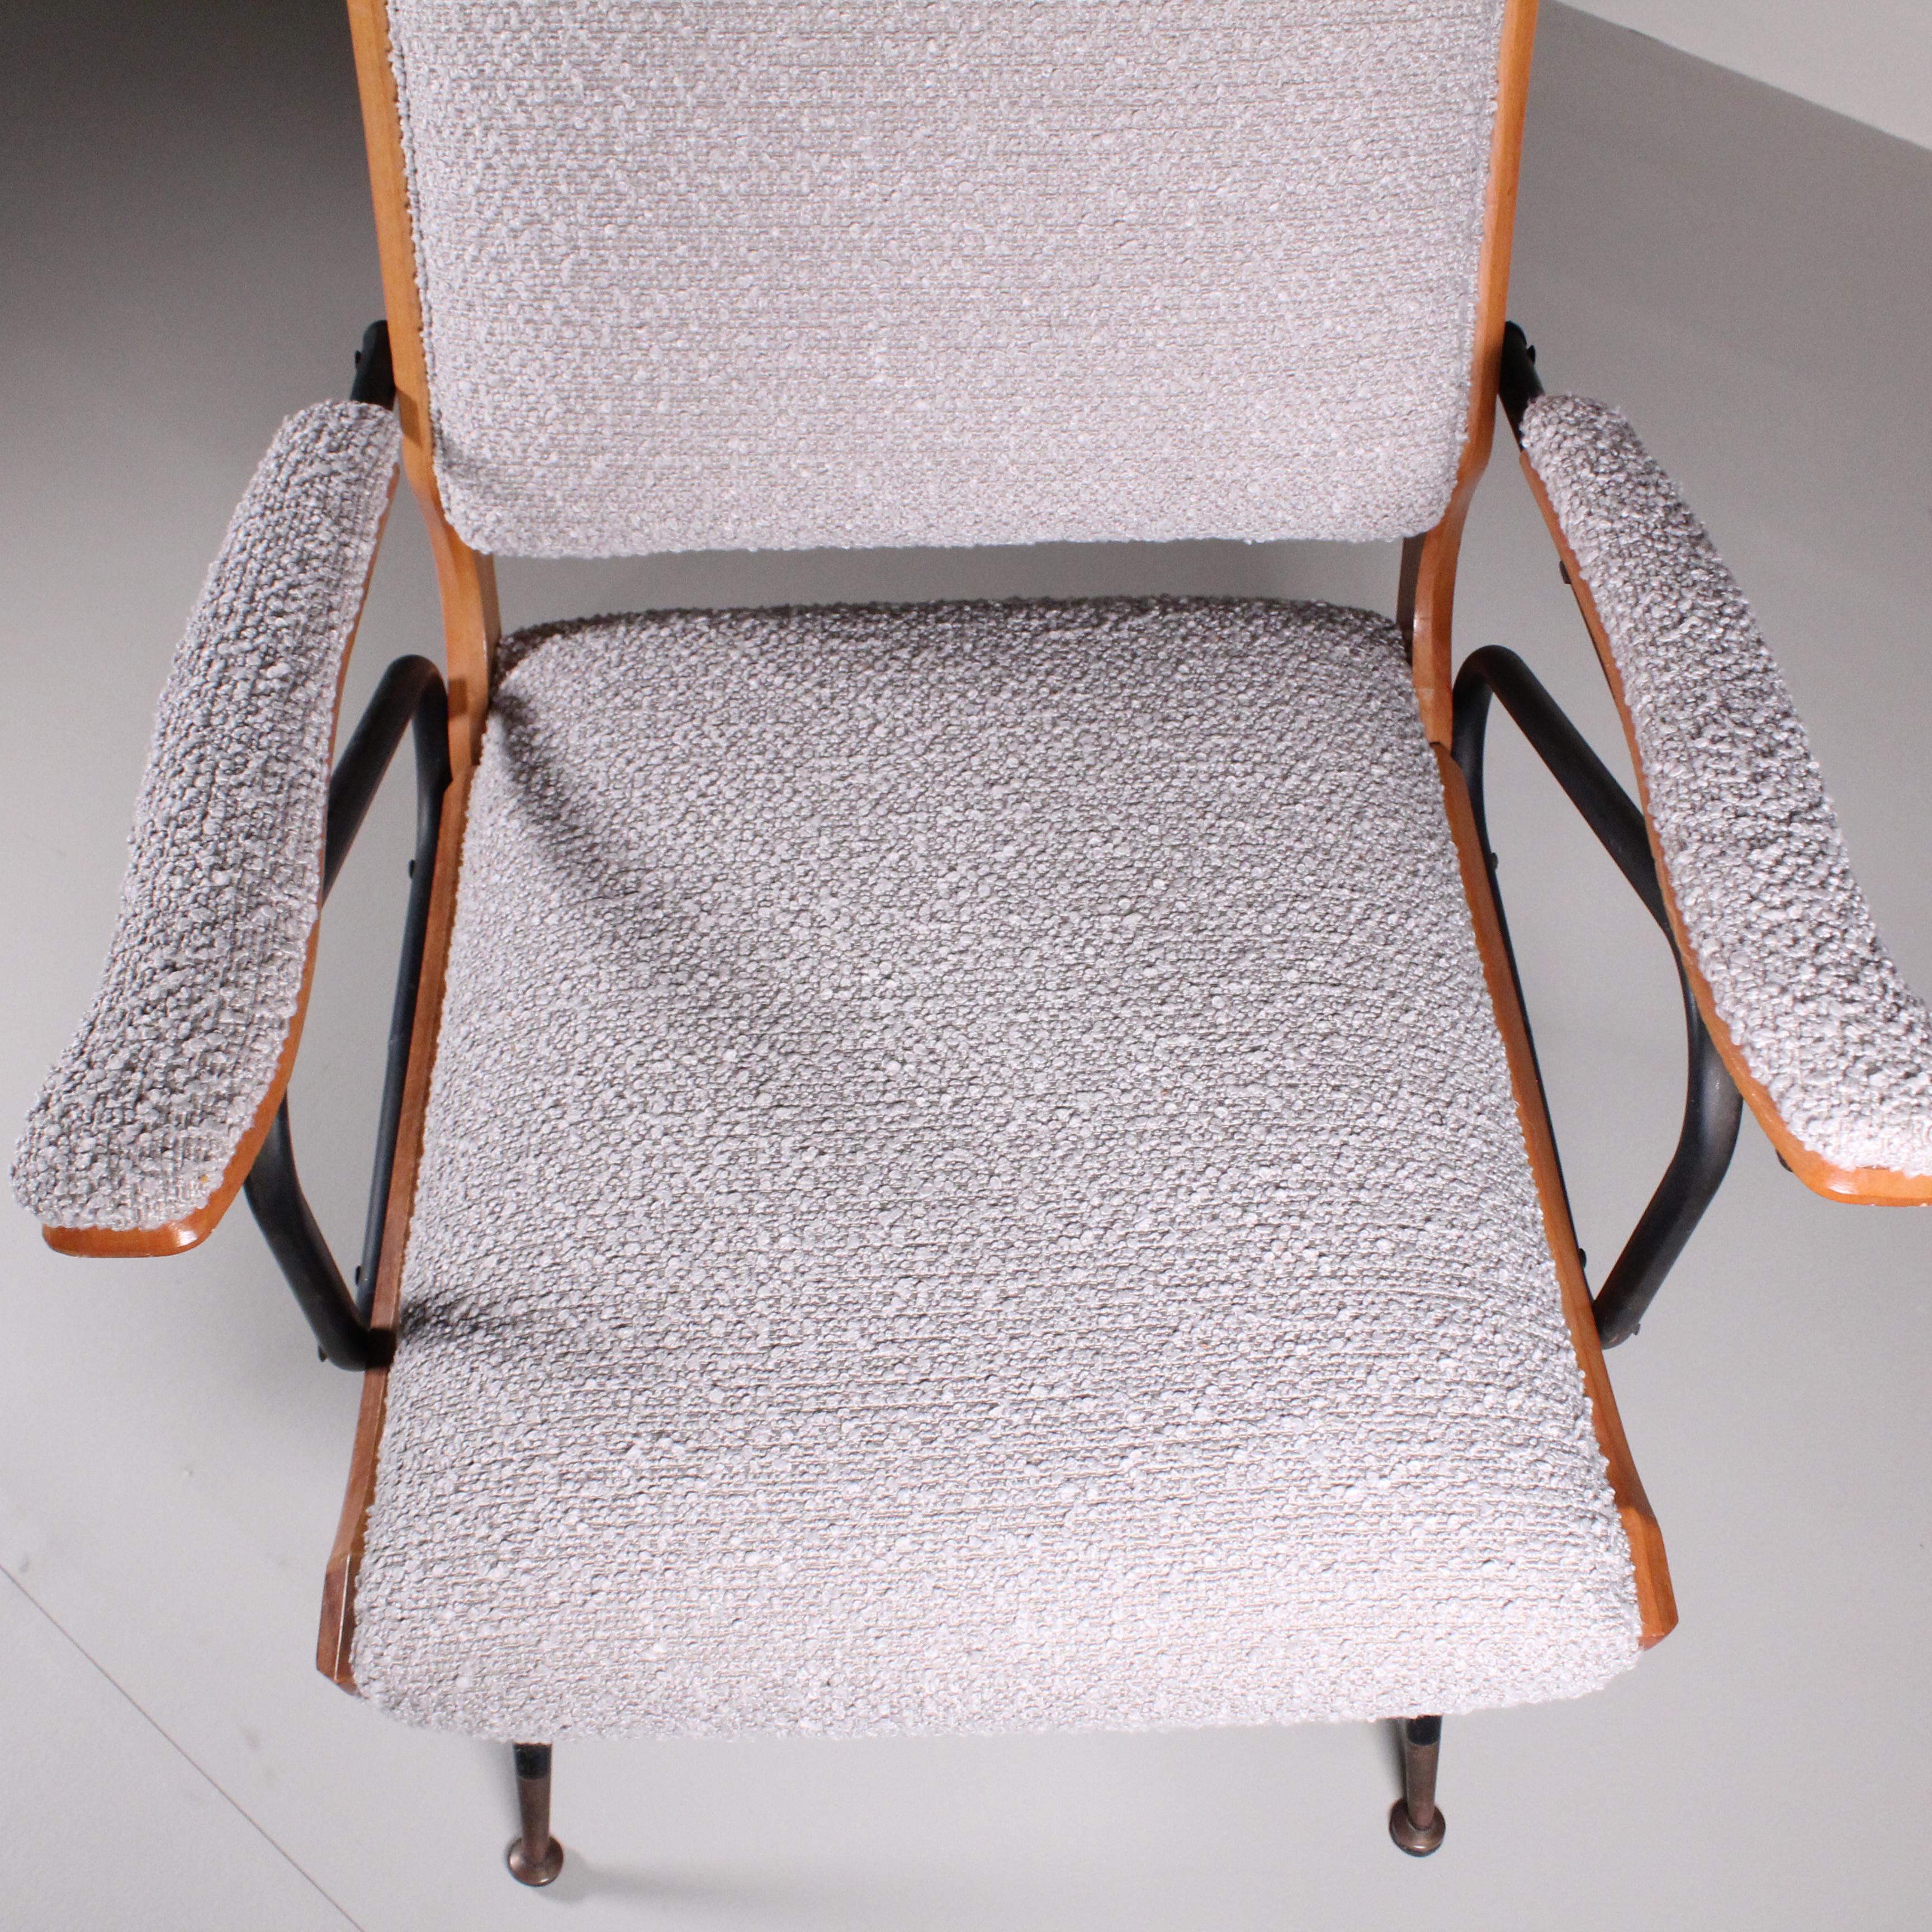 Pair of bouclé recliners, Italian manufacture, circa 1960 For Sale 2